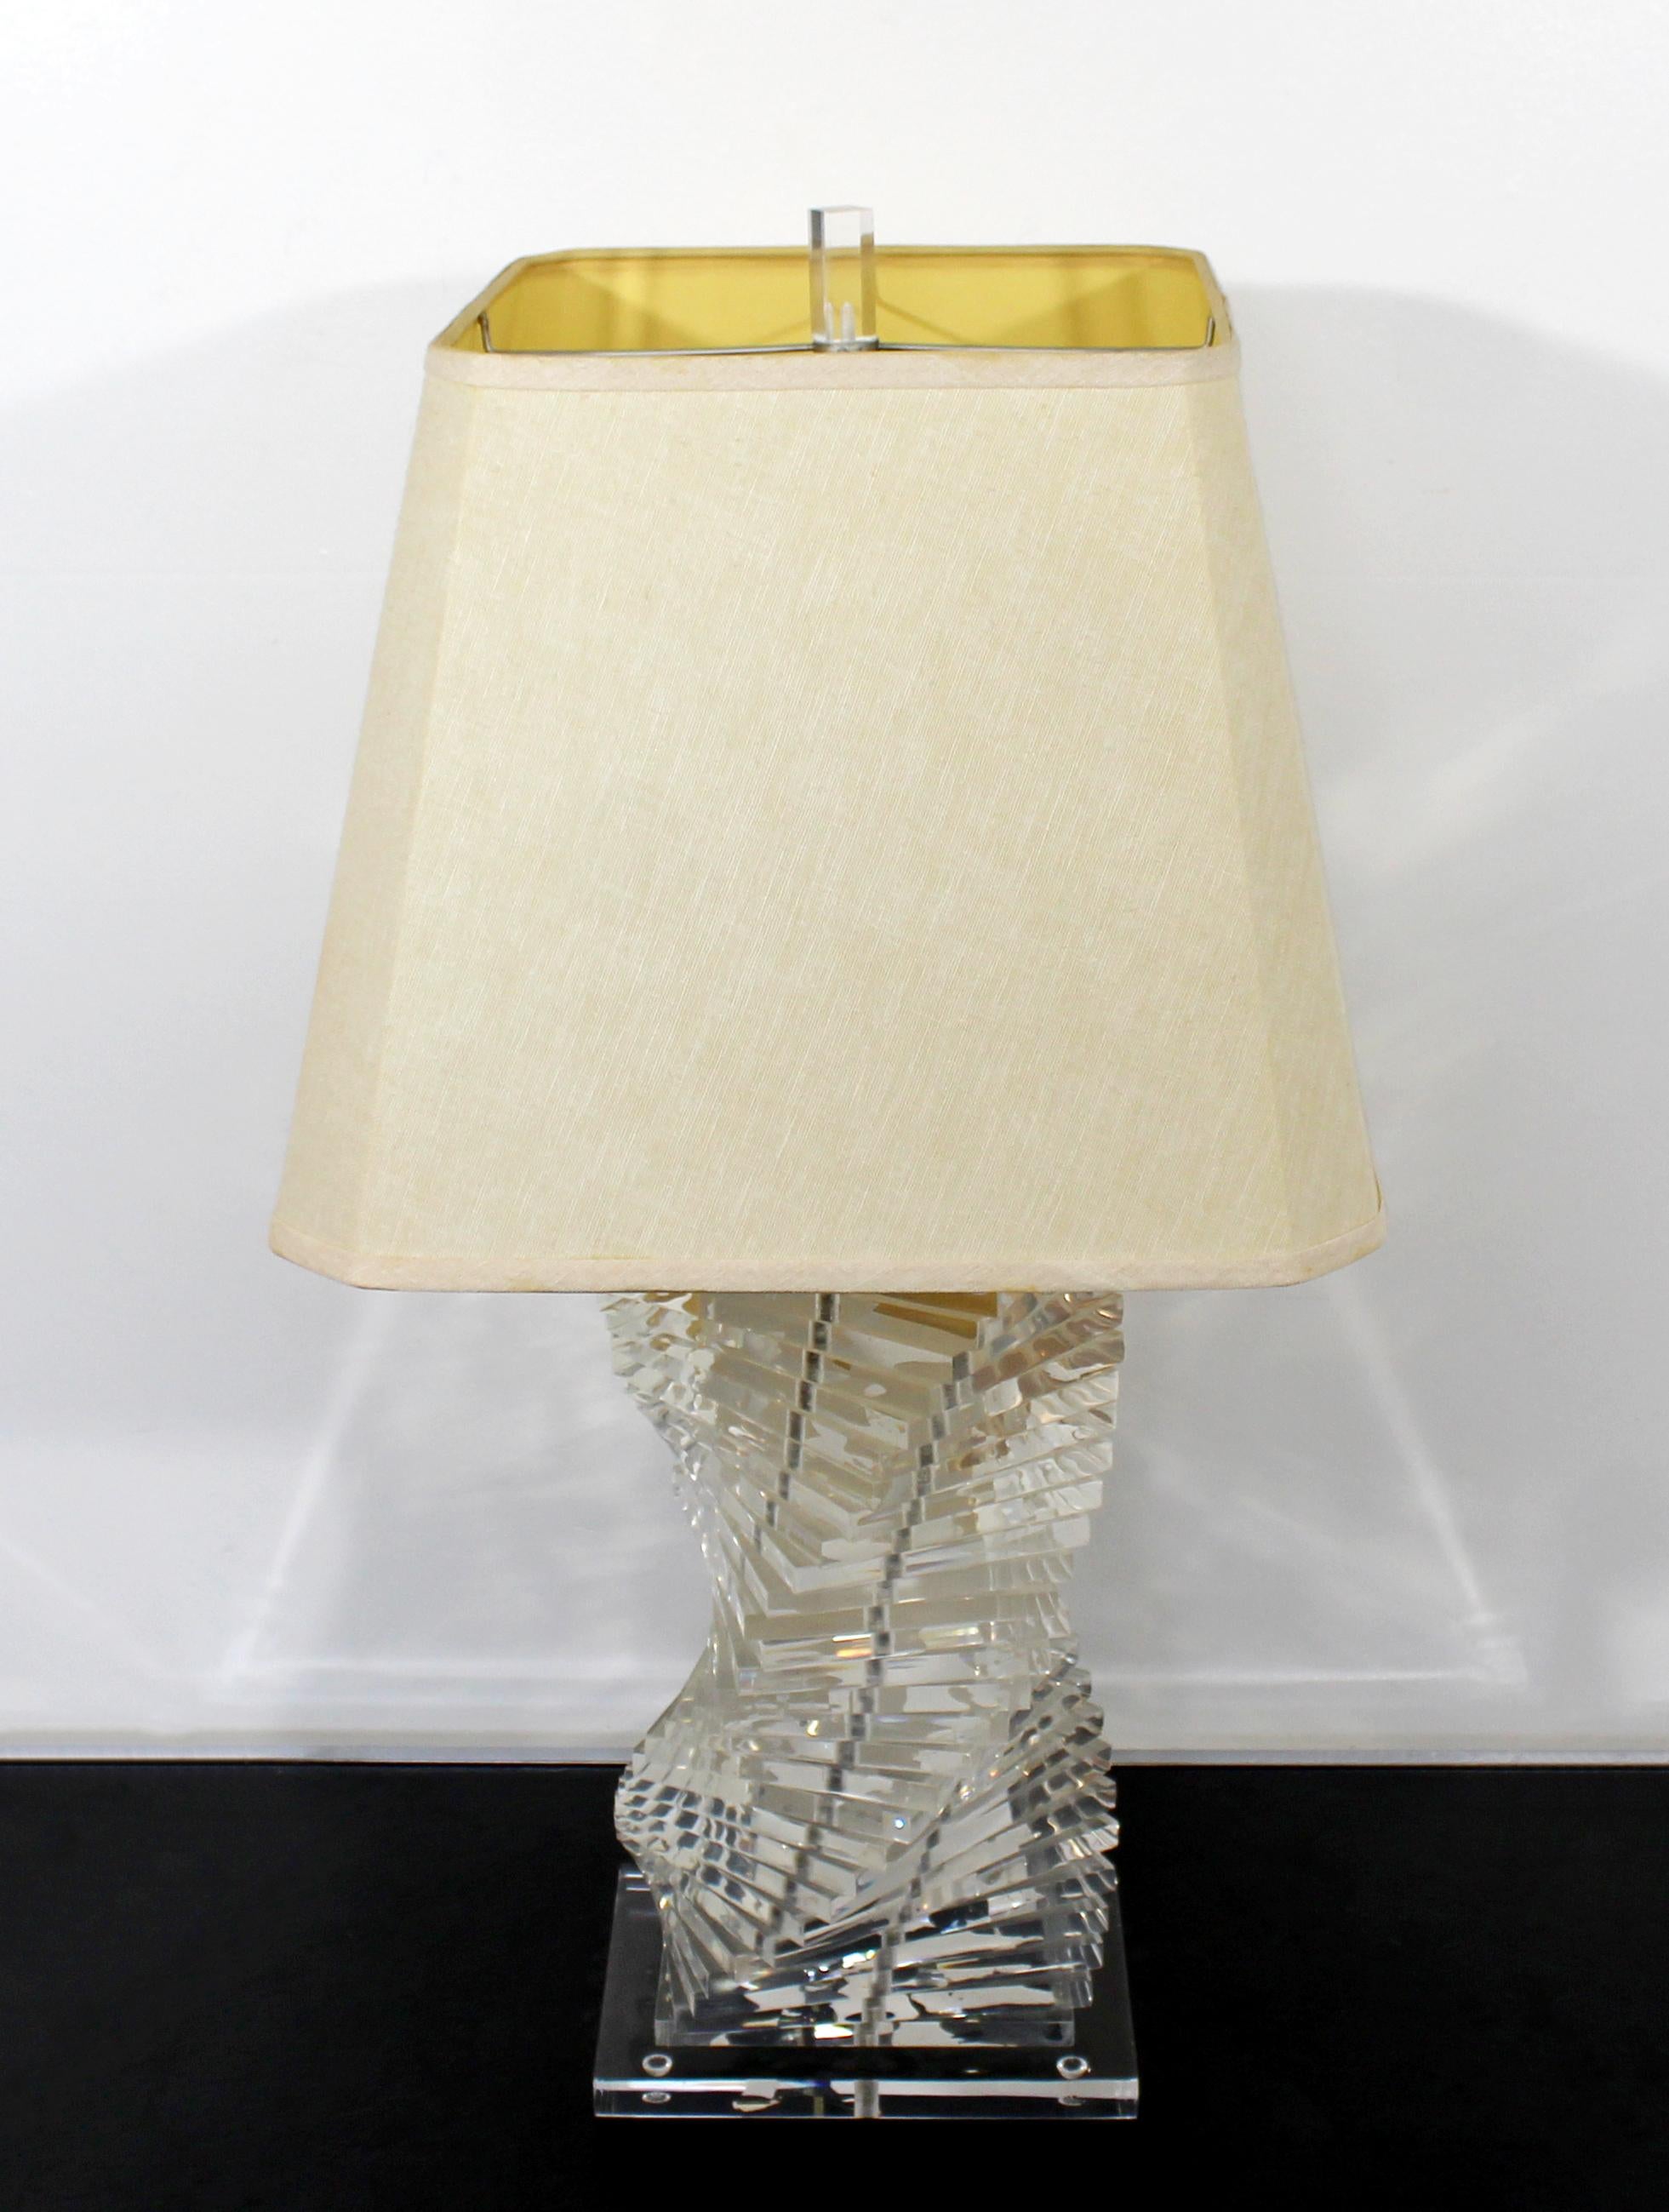 For your consideration is a stunning, helix shaped, stacked Lucite table lamp, with original shade and finial circa the 1970s. In excellent vintage condition. The dimensions of the lamp are 9